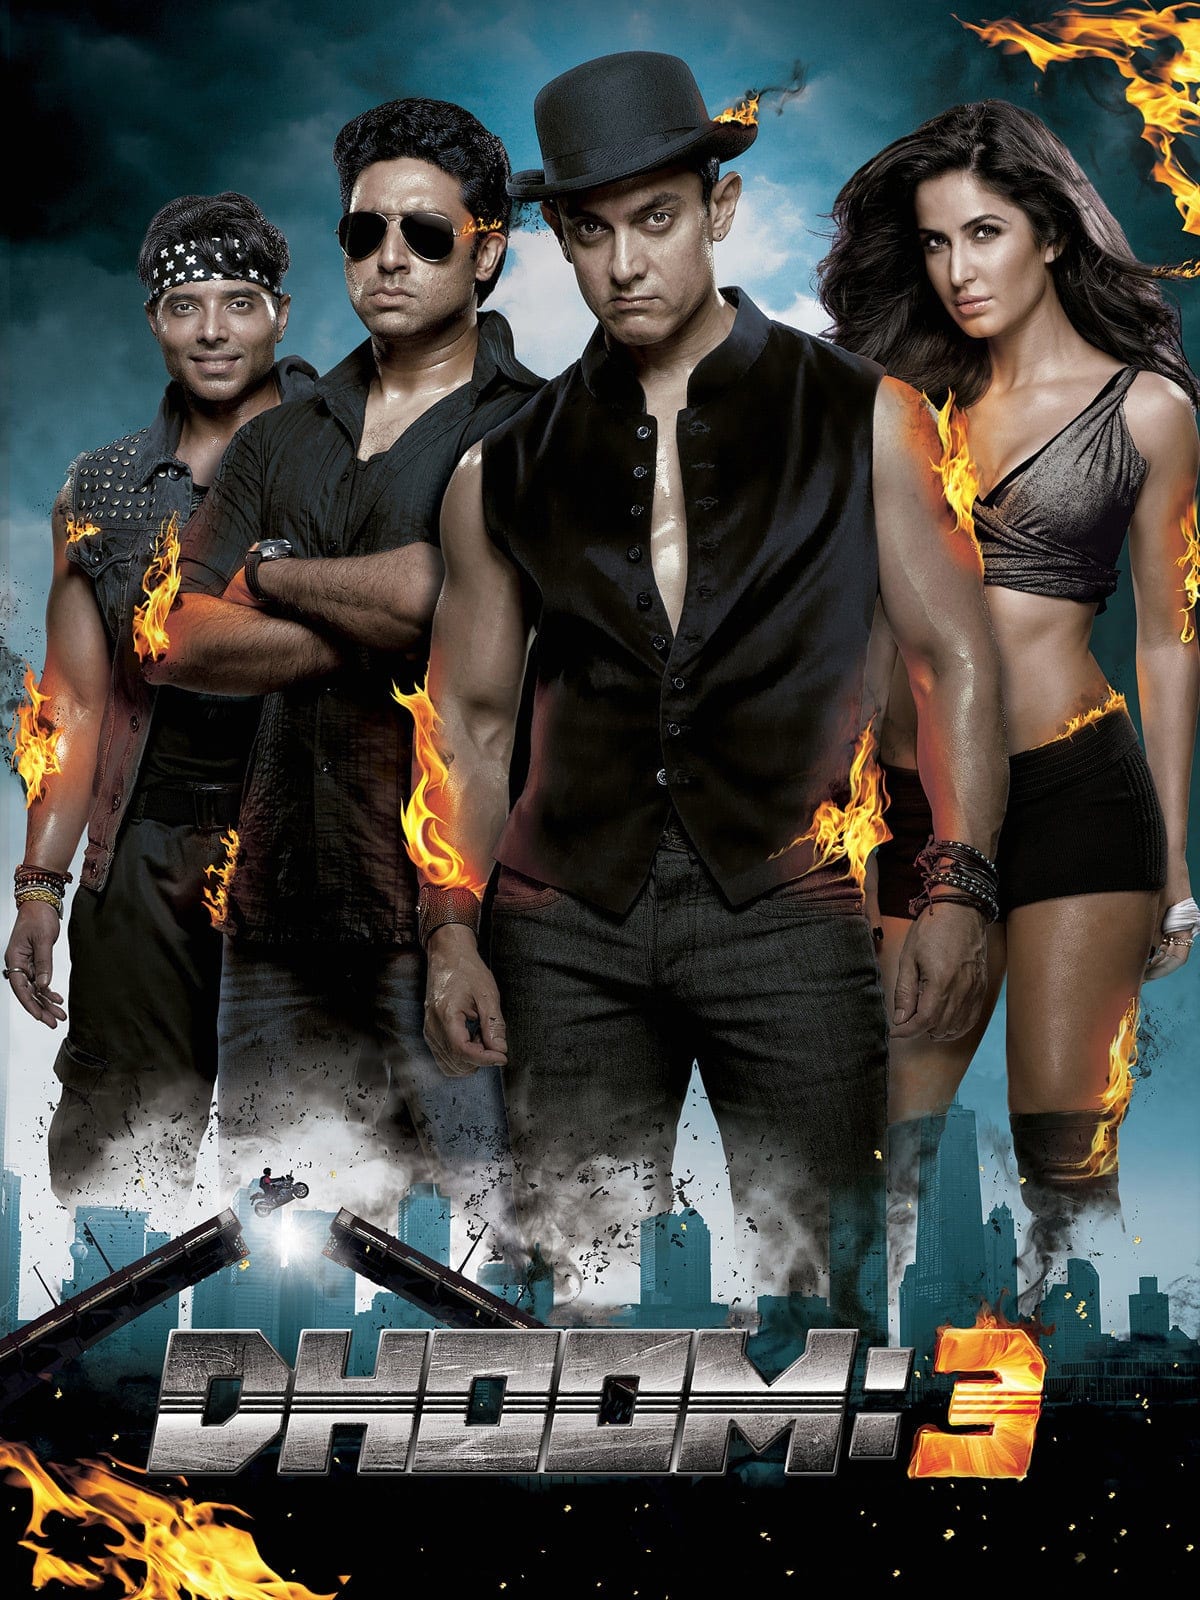 Poster for the movie "Dhoom 3"